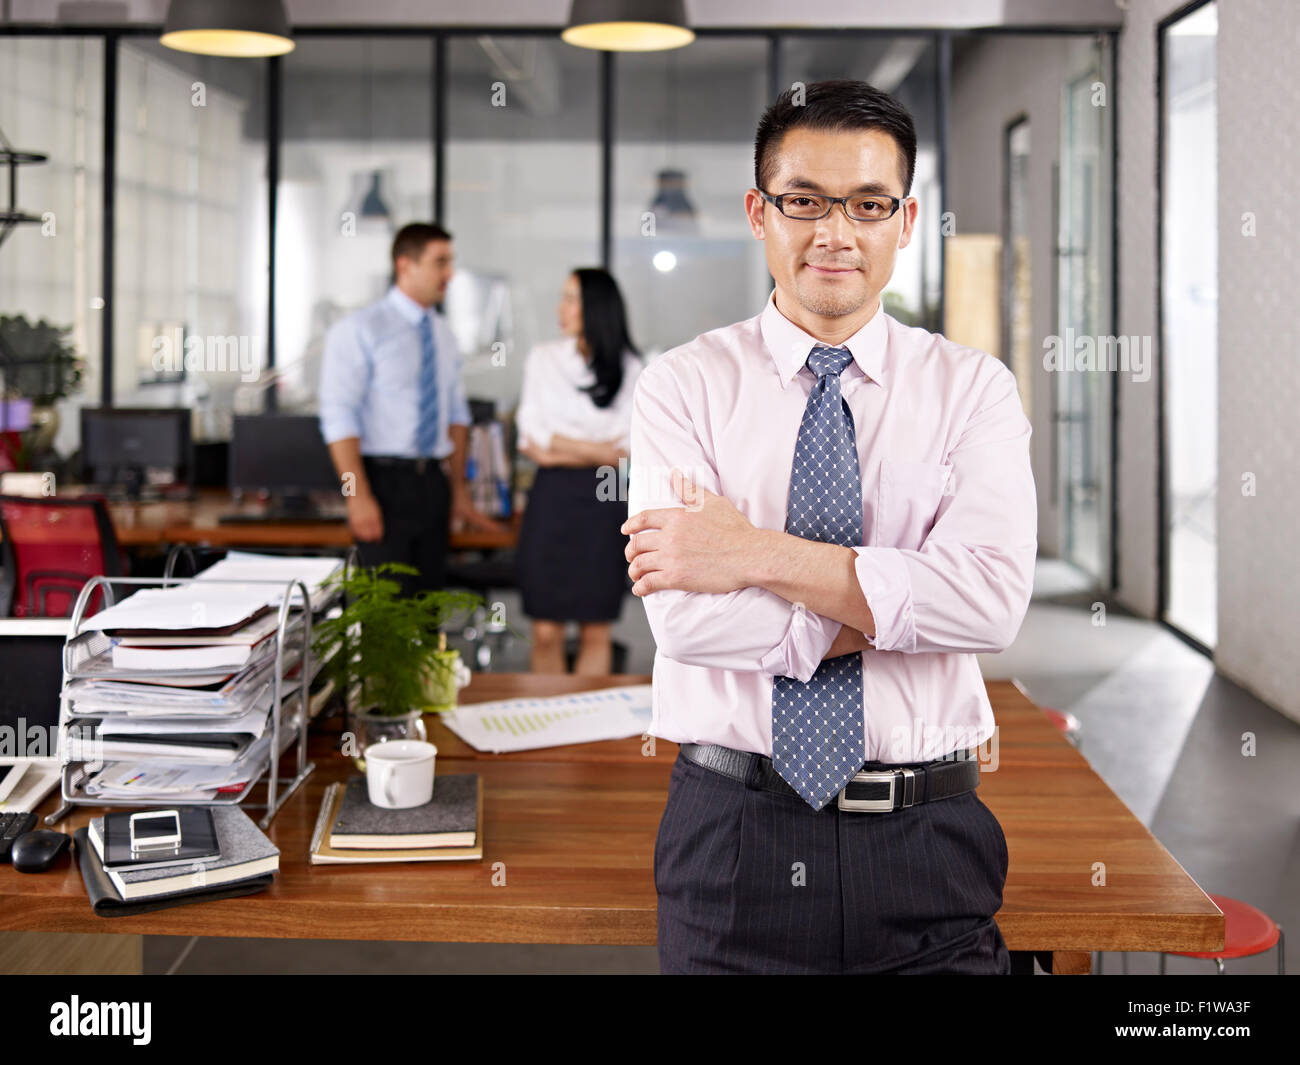 Portrait of asian business executive standing in office Banque D'Images